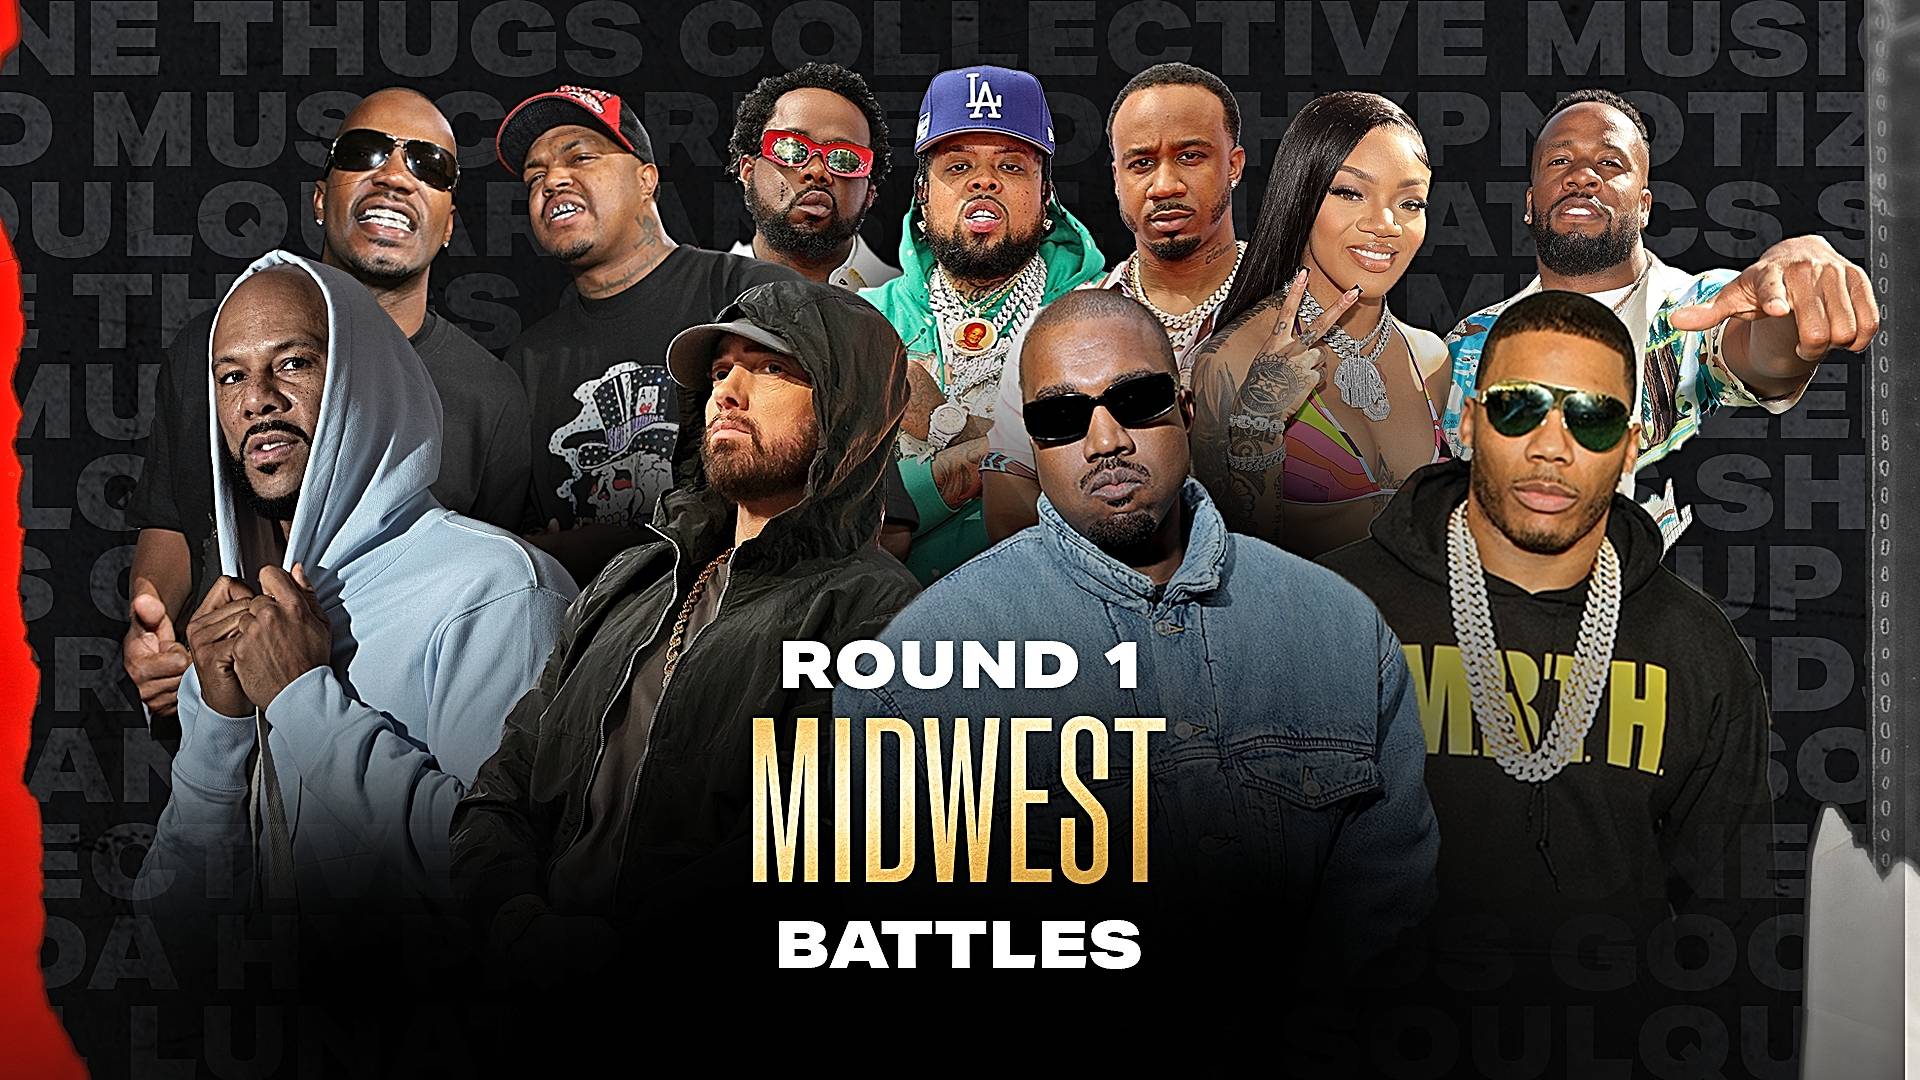 Roud 1 Midwest Battles, Greatest Rap Crew of All Time